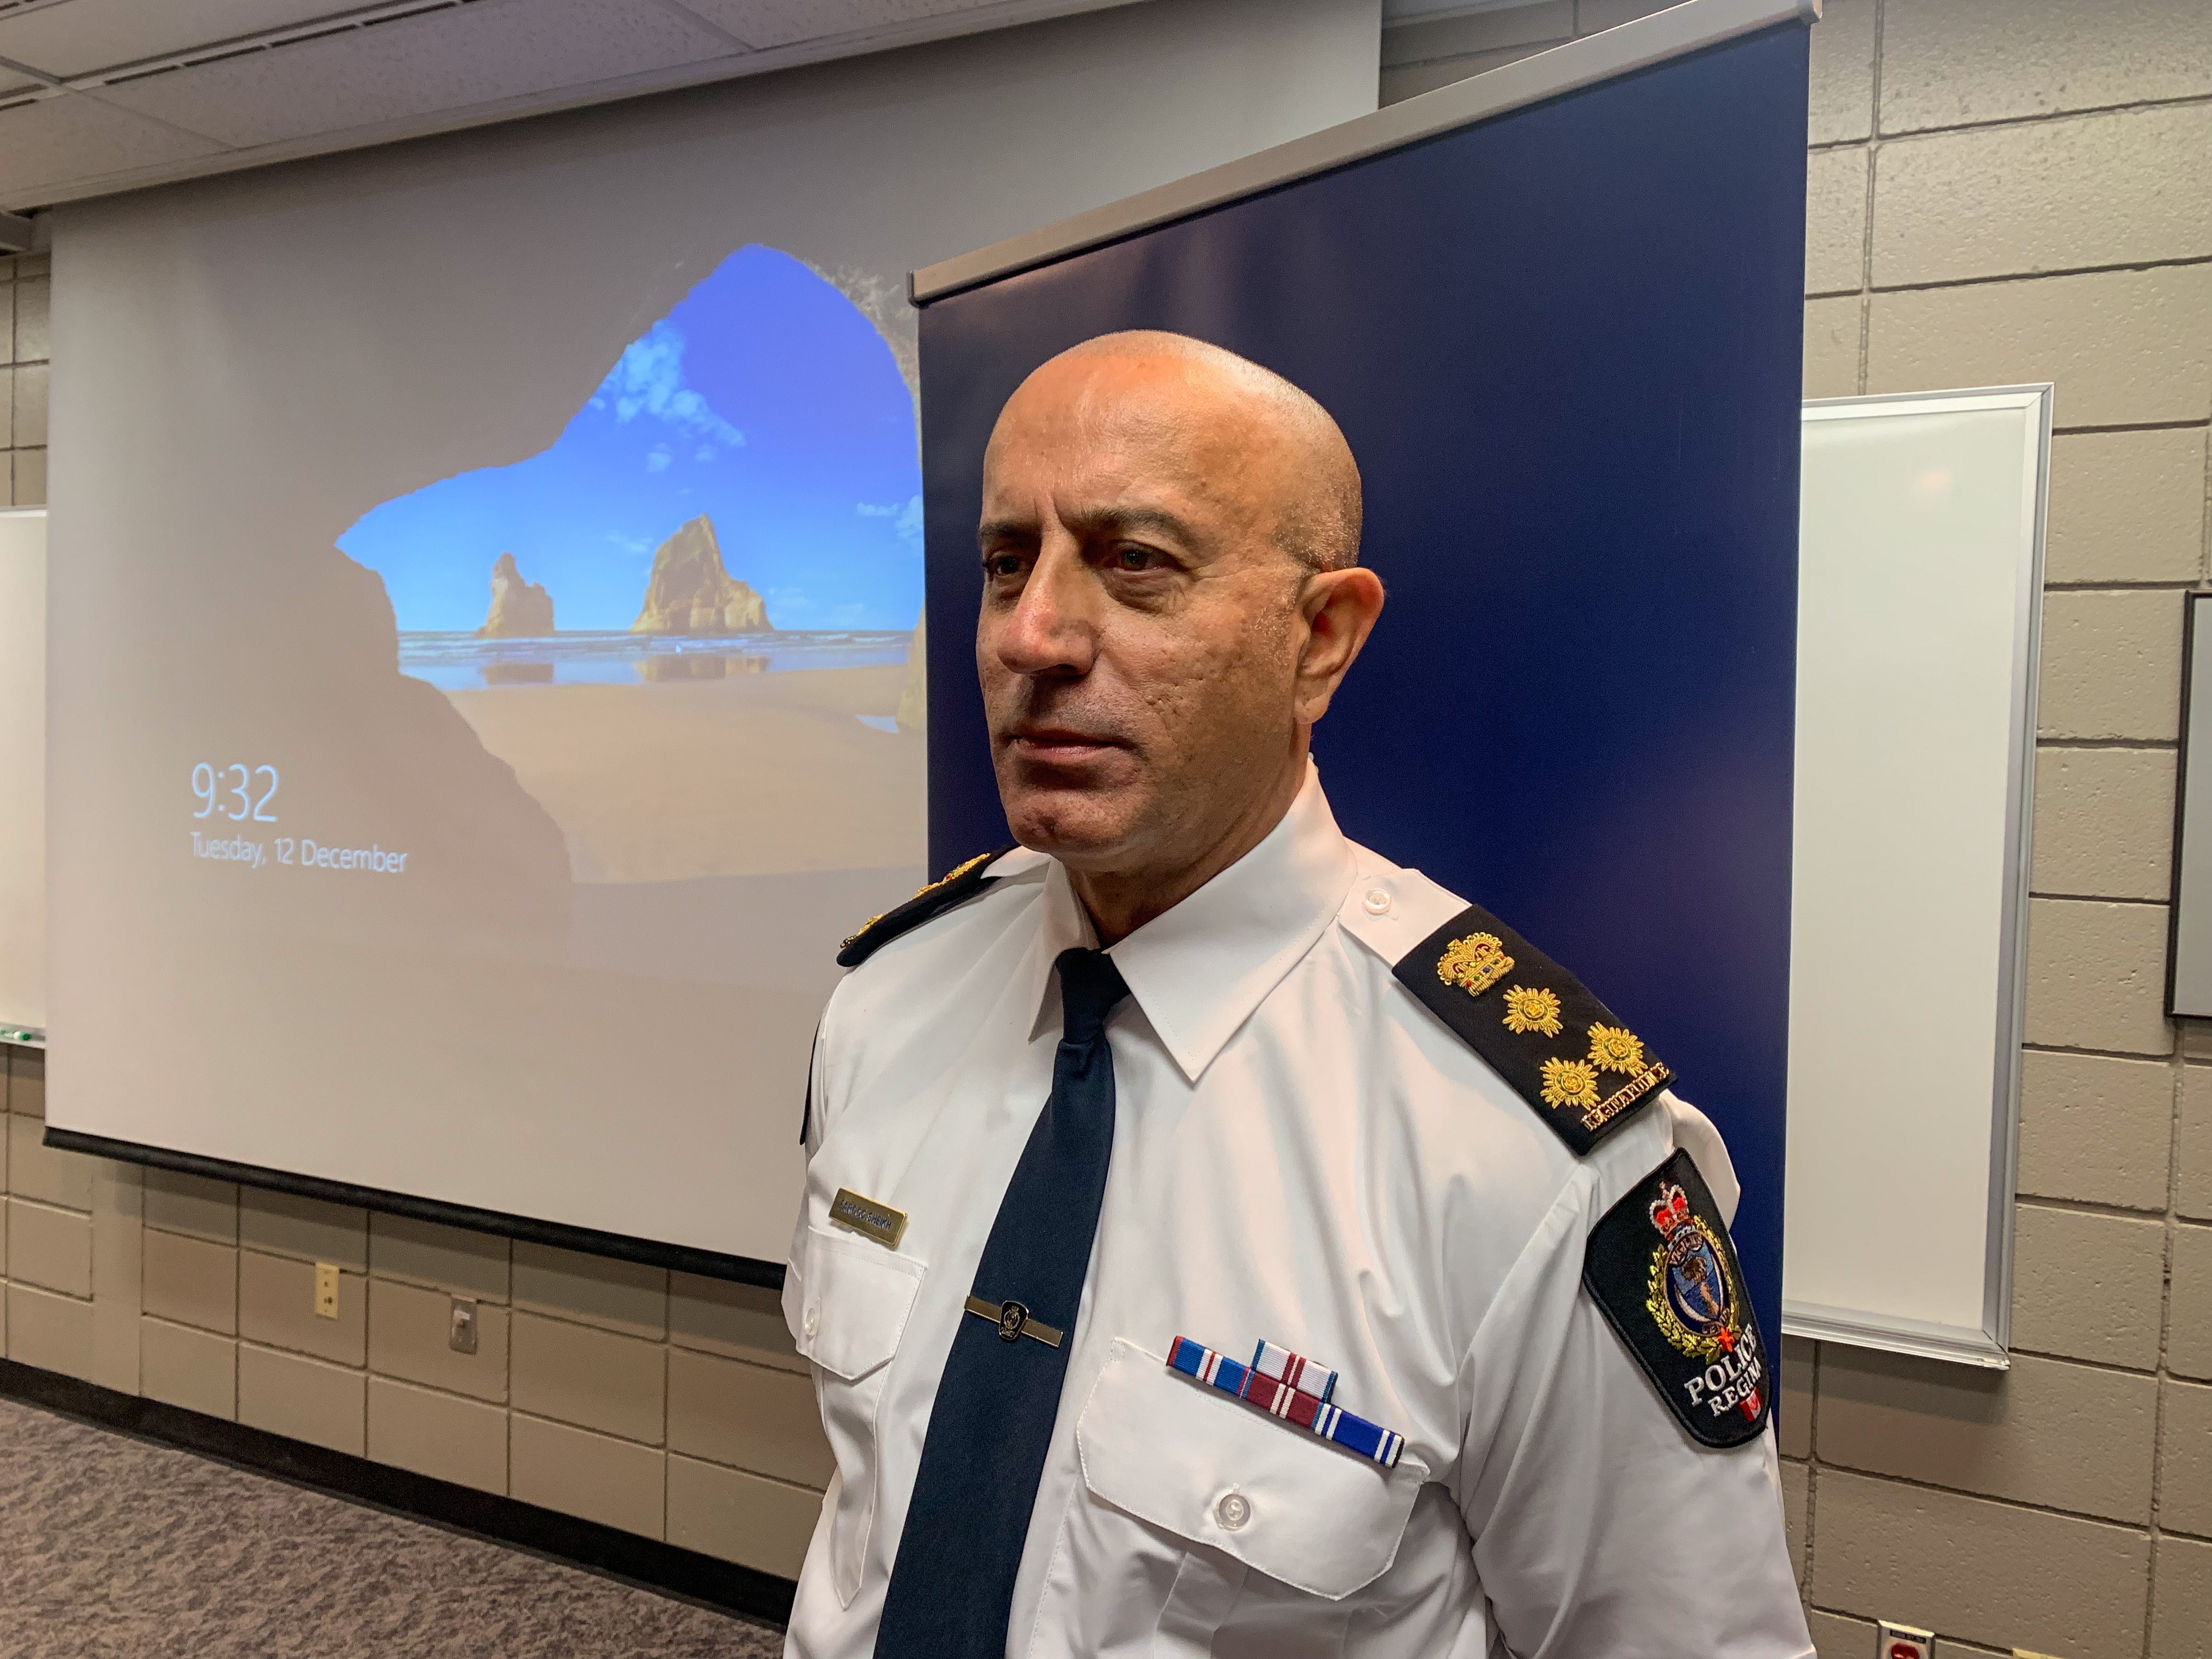 ‘My biggest privilege’: Regina’s newest police chief ready for the challenge